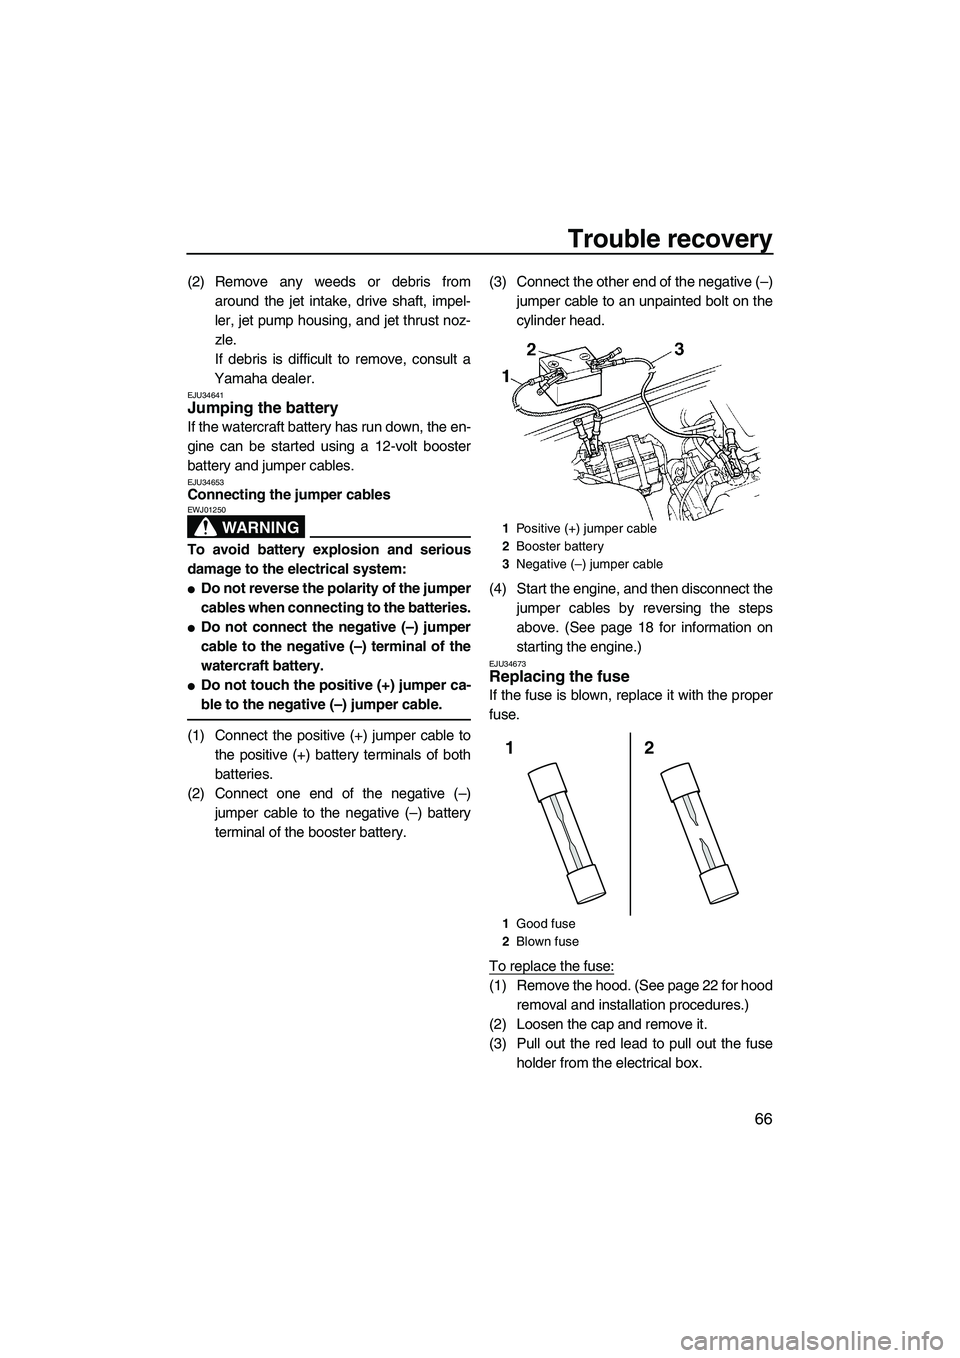 YAMAHA SUPERJET 2010  Owners Manual Trouble recovery
66
(2) Remove any weeds or debris from
around the jet intake, drive shaft, impel-
ler, jet pump housing, and jet thrust noz-
zle.
If debris is difficult to remove, consult a
Yamaha de